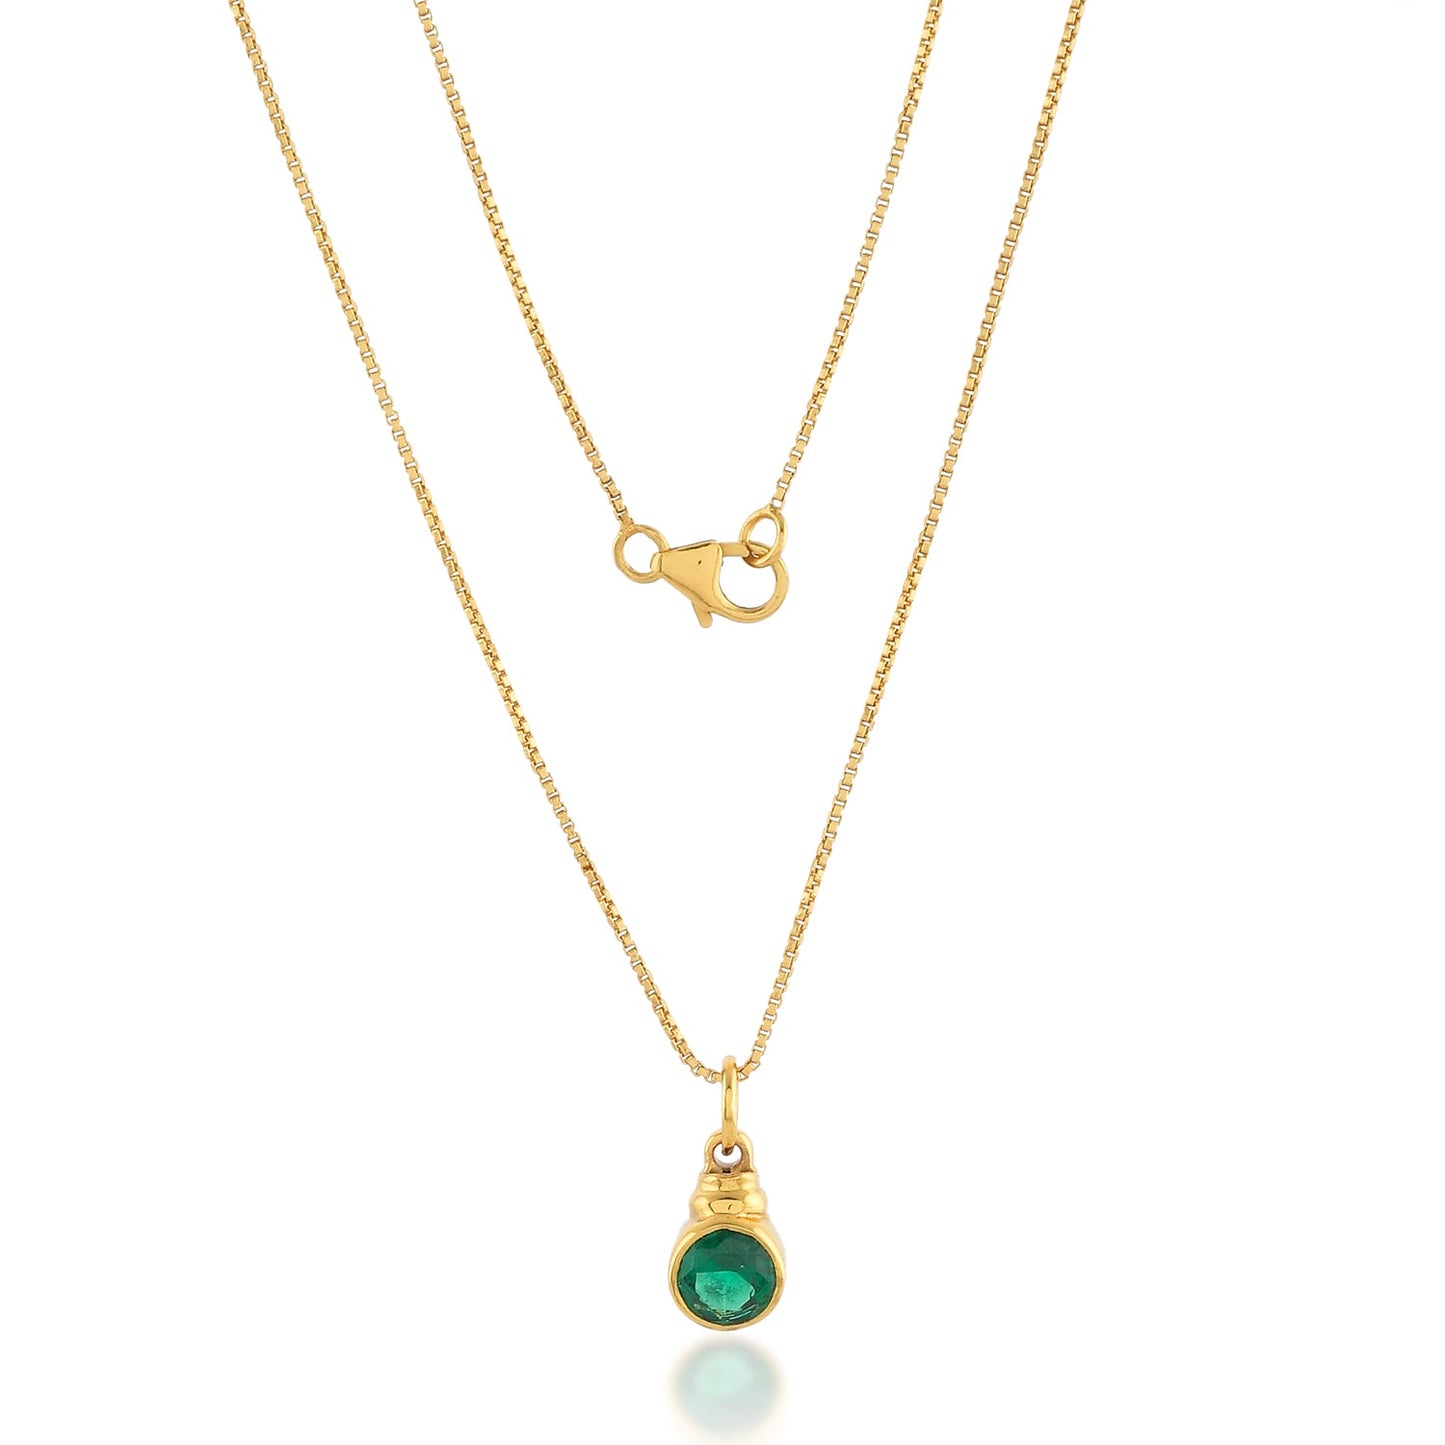 Estelle Necklace - Emerald Green - Lily King